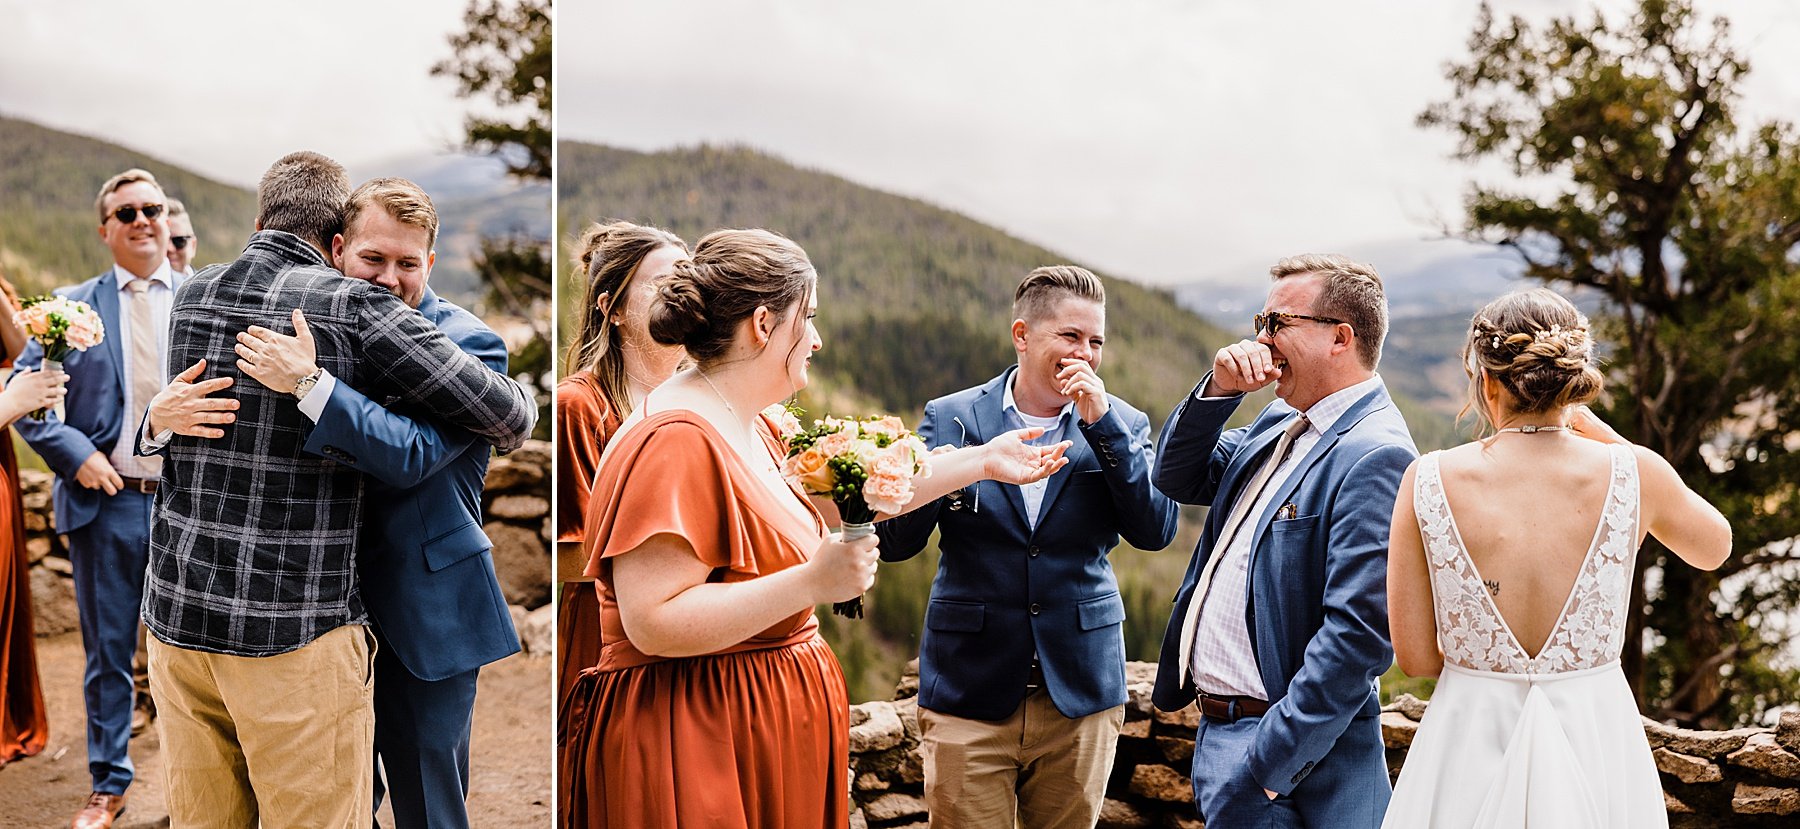 Fall Elopement at Sapphire Point Overlook in Breckenridge, Colorado